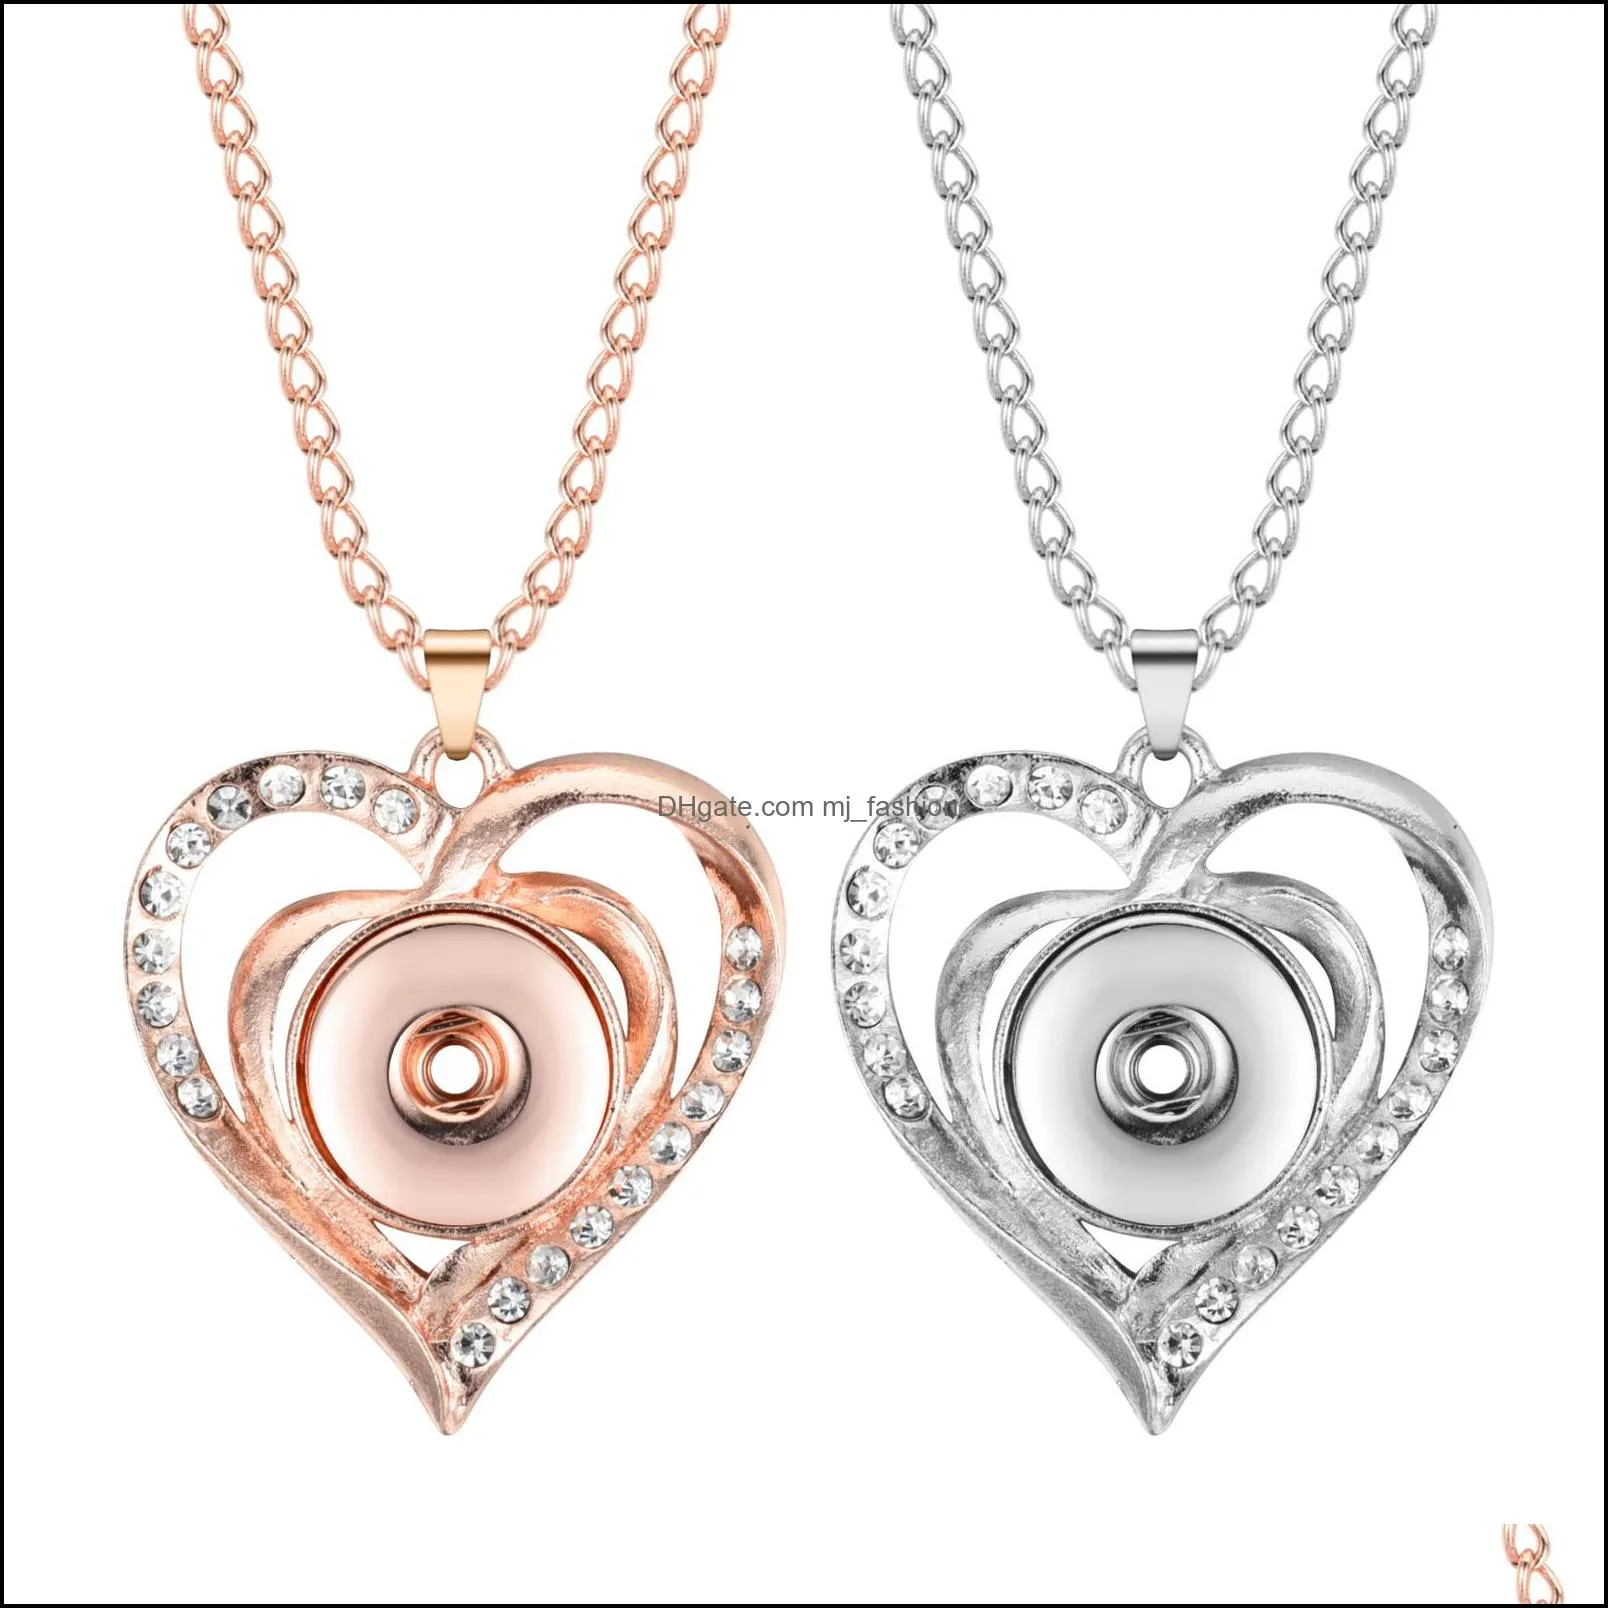 snap button jewelry rhinestone silver rose gold heart shape pendant fit 18mm snaps buttons necklace for women men noosa